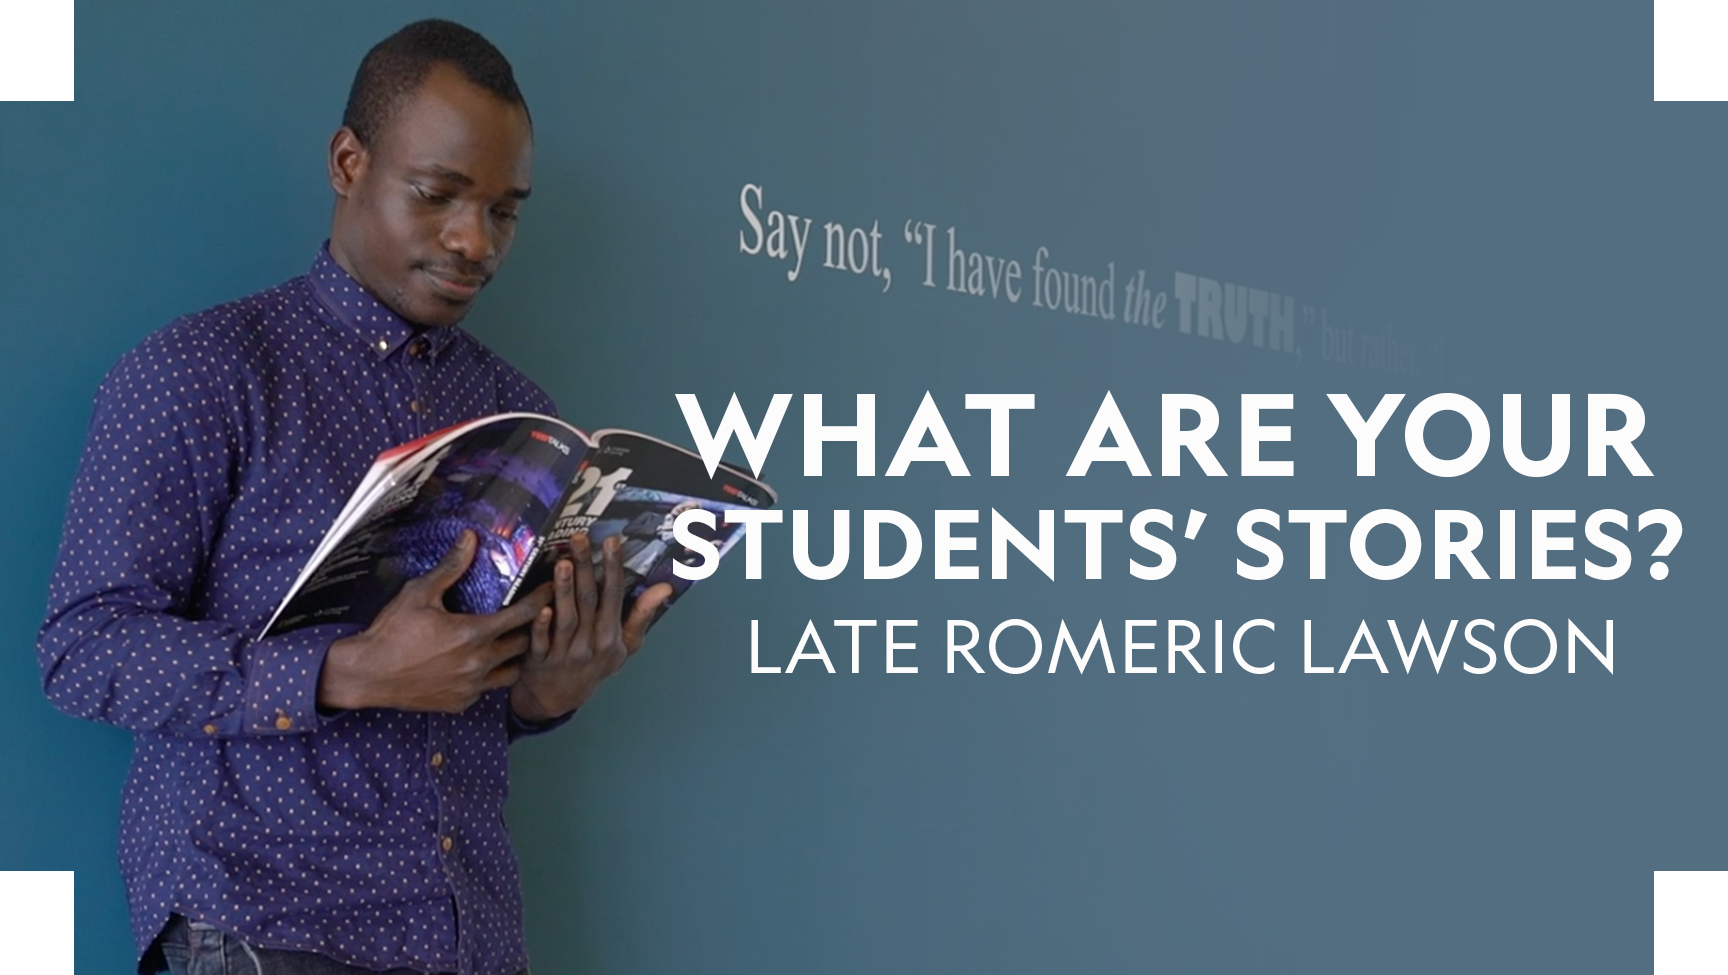 Student Sotries - Late Romerica Lawson